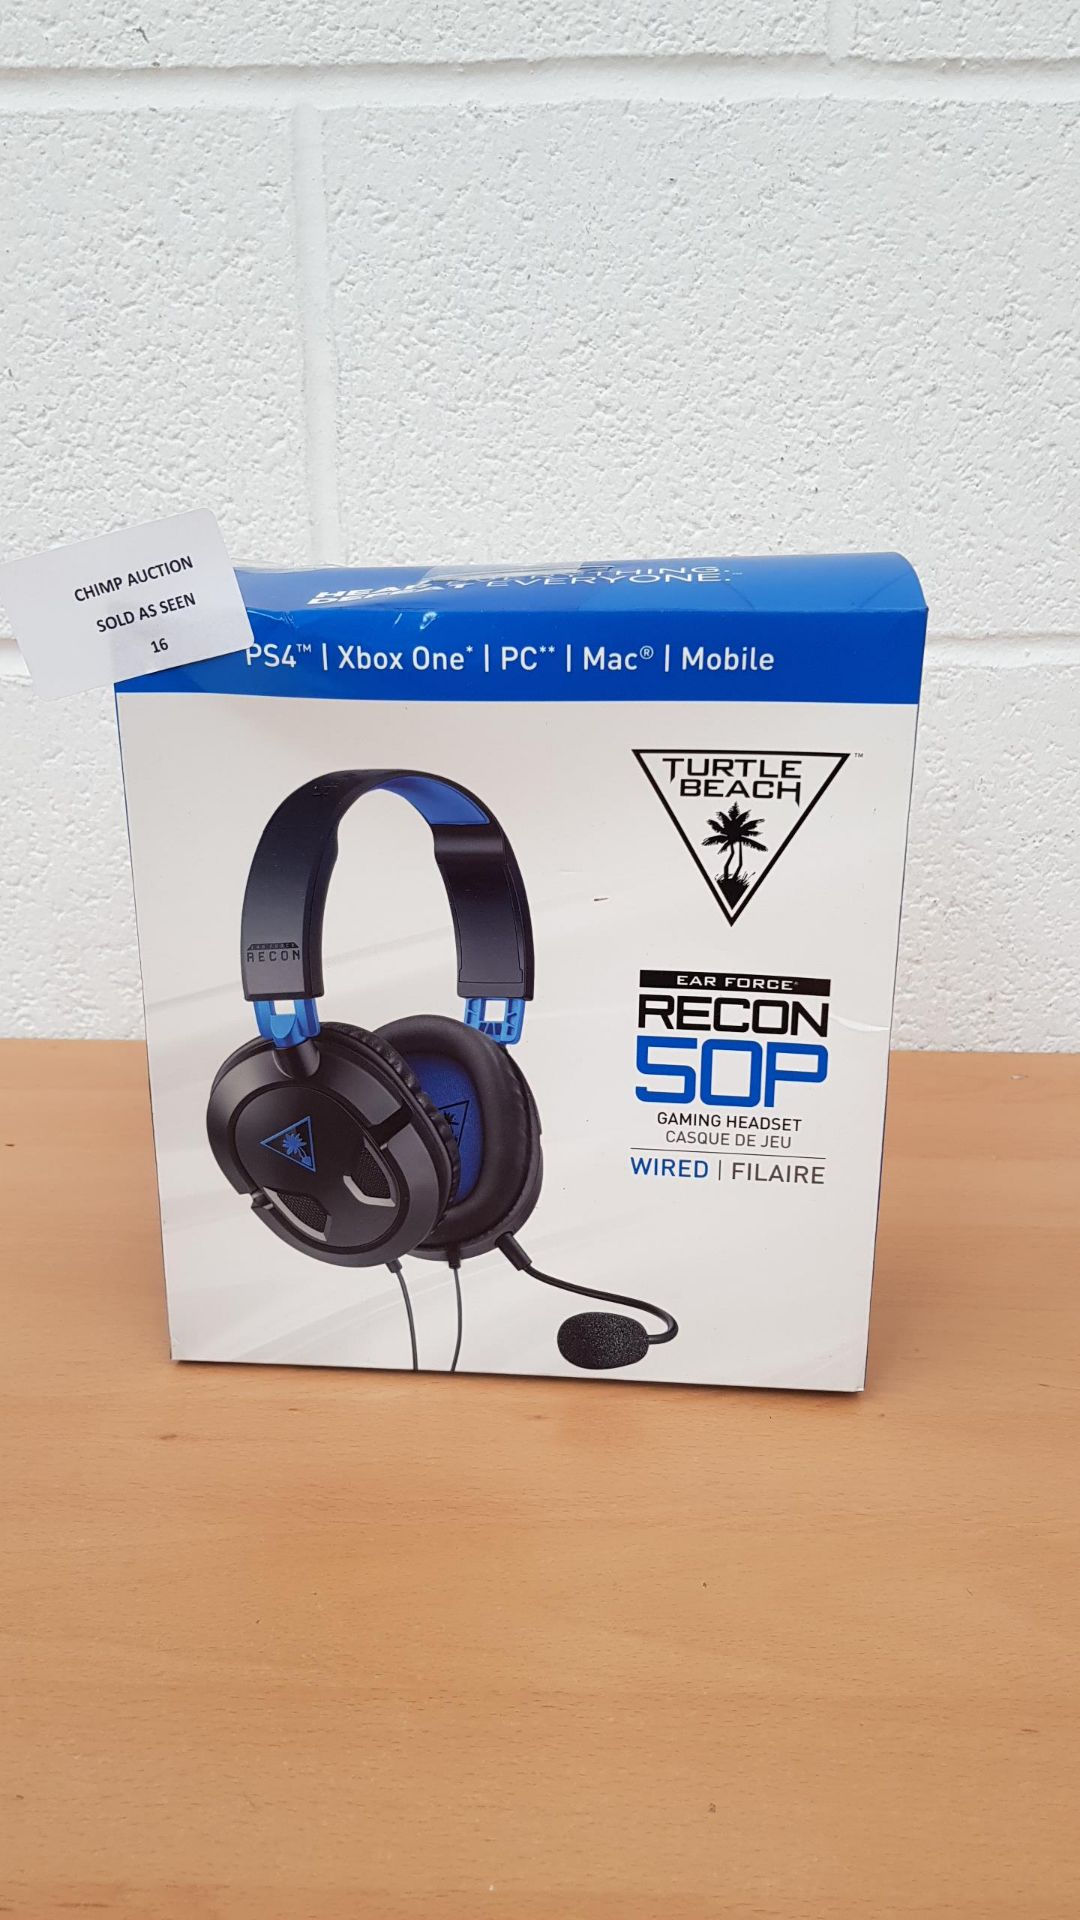 Turtle Beach Recon 50P Stereo Gaming Headset - Sony PS4 RRP £59.99.